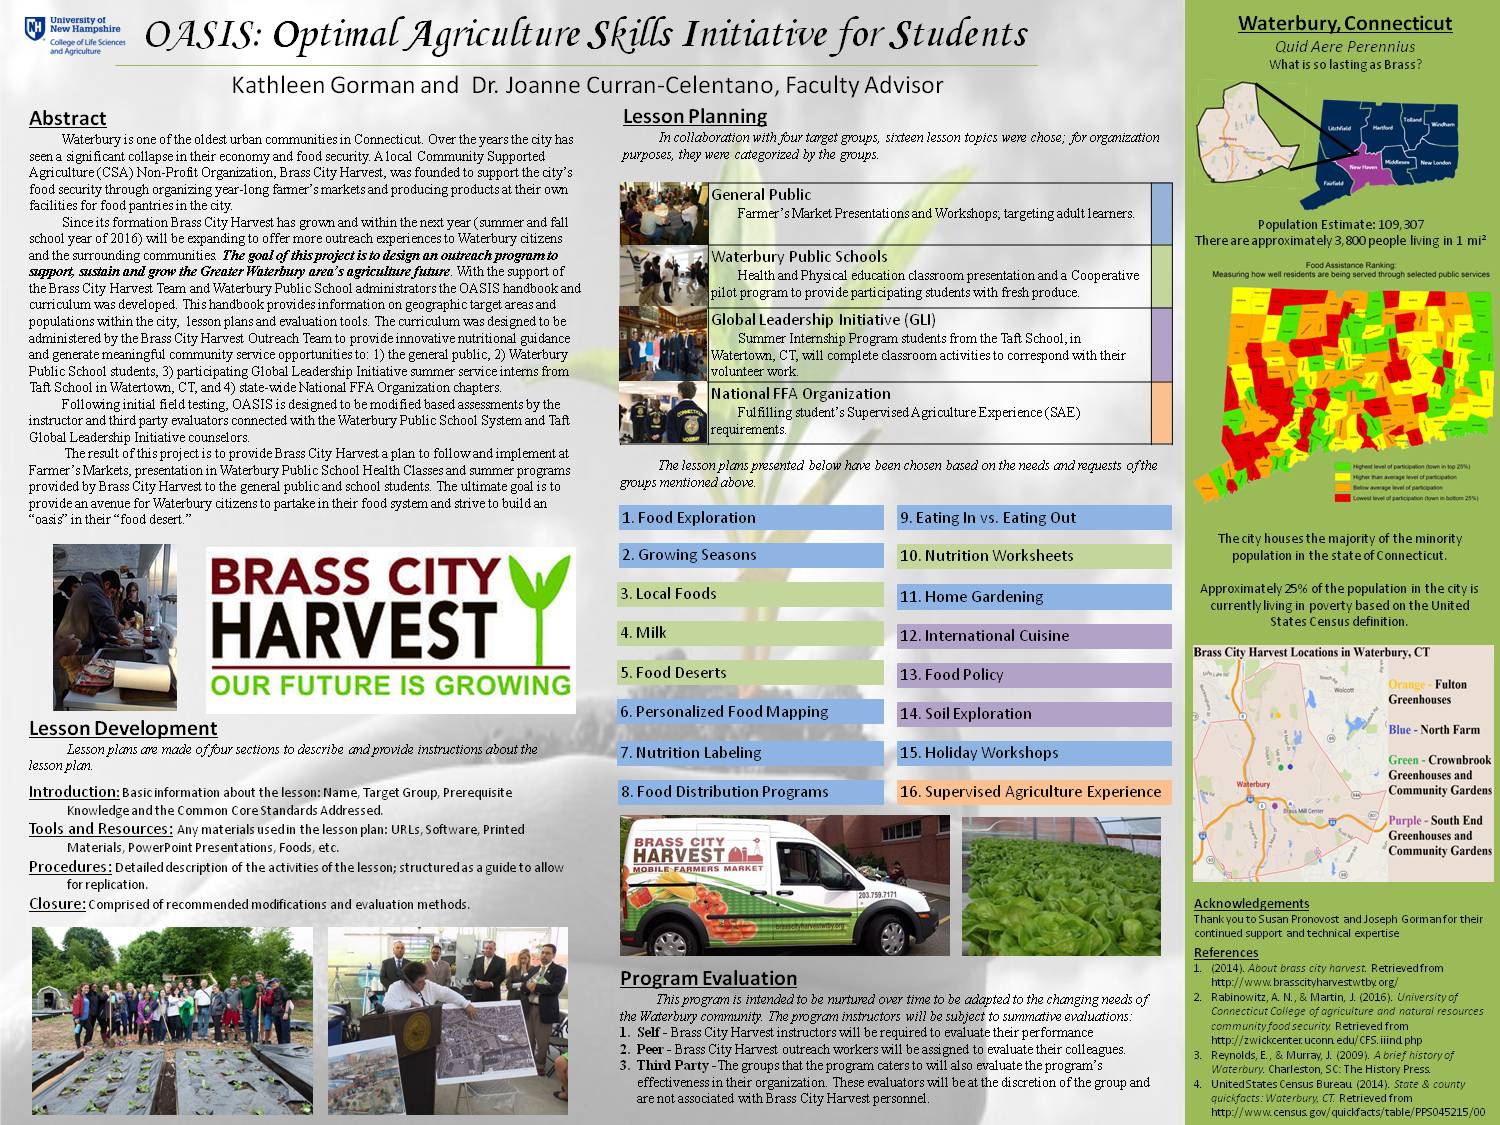 Oasis - Optimal Agriculture Skills Initiative For Students by krx59